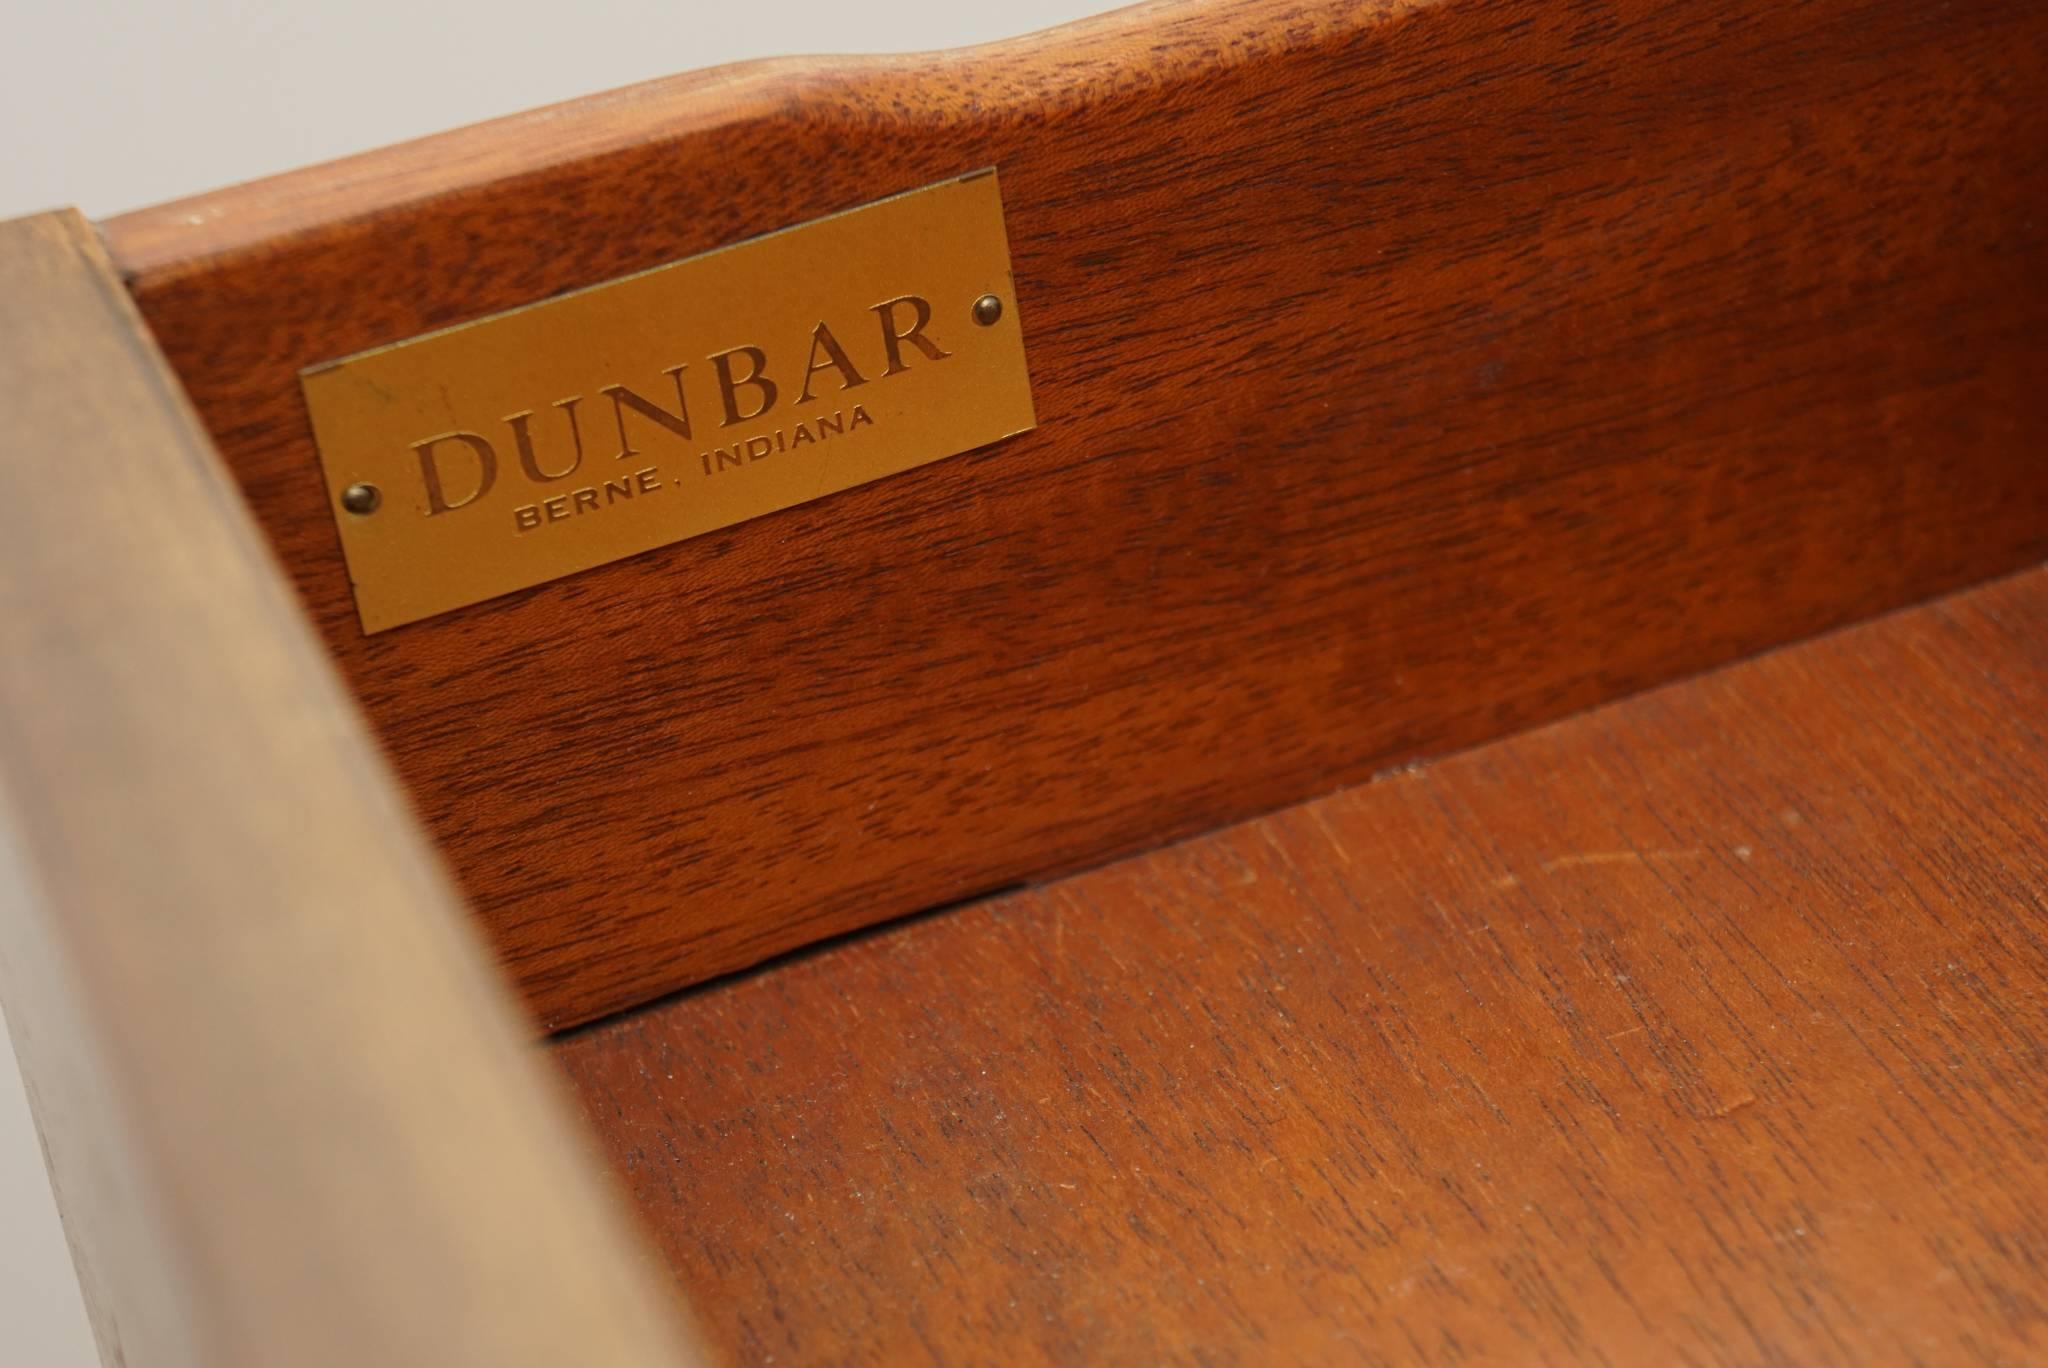 Leather Walnut Chest of Drawers by Dunbar